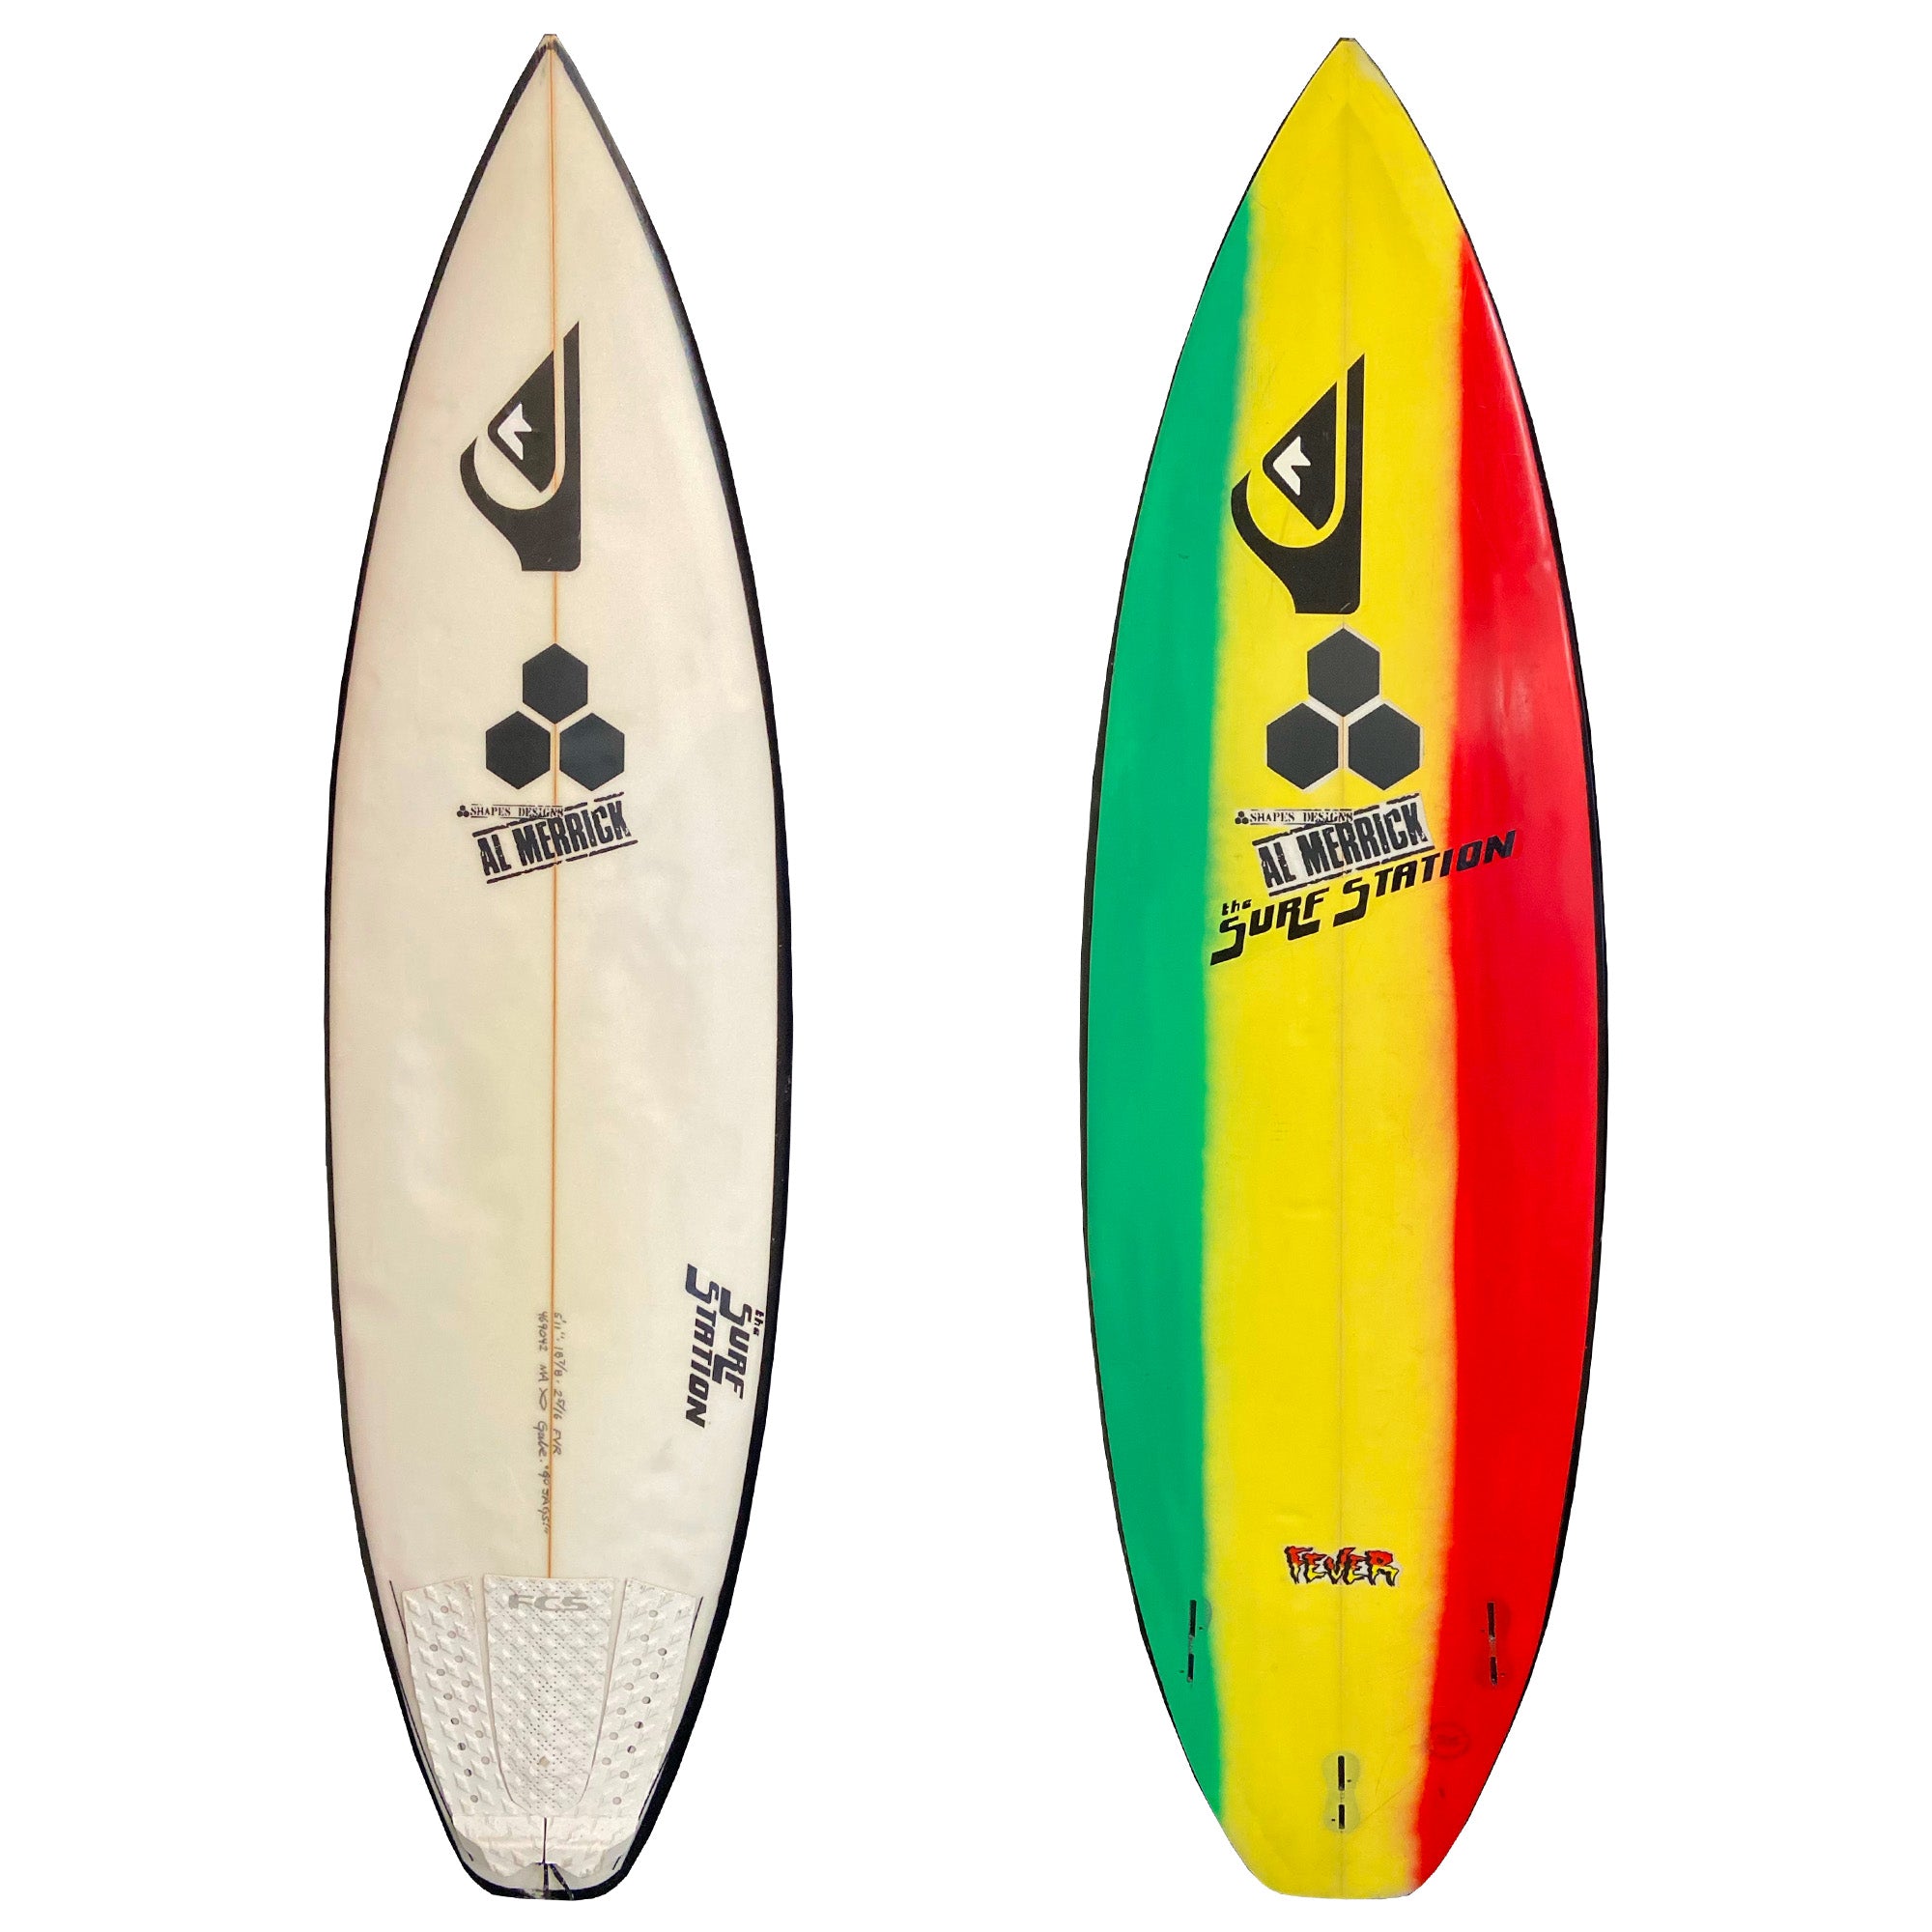 Channel Islands Fever 5'11 Used Surfboard - Surf Station Store